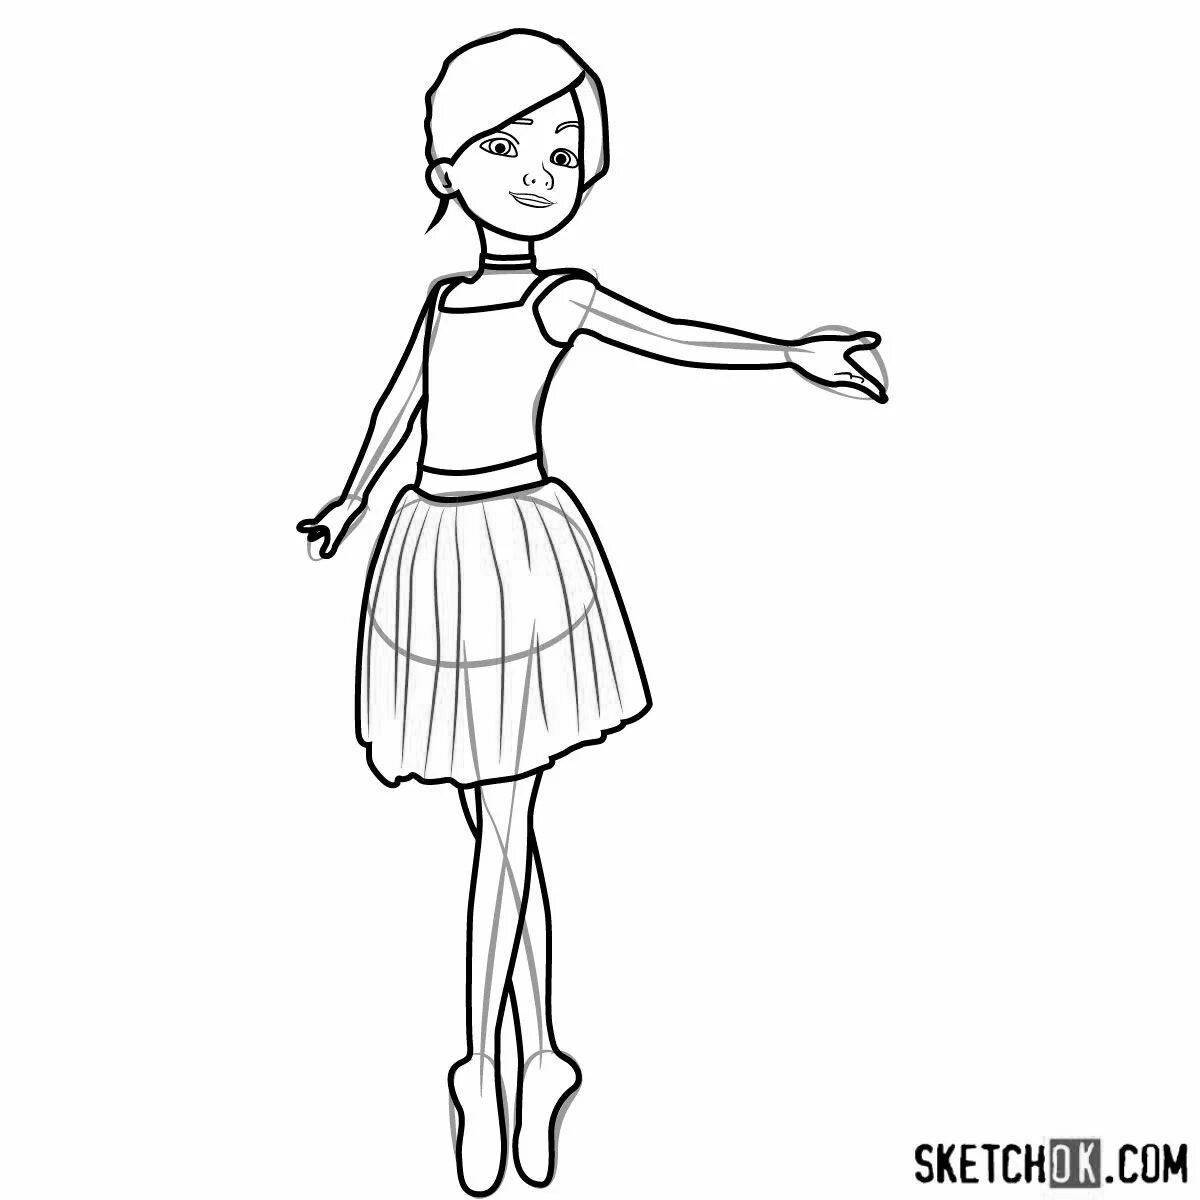 Coloring page exquisite ballerina